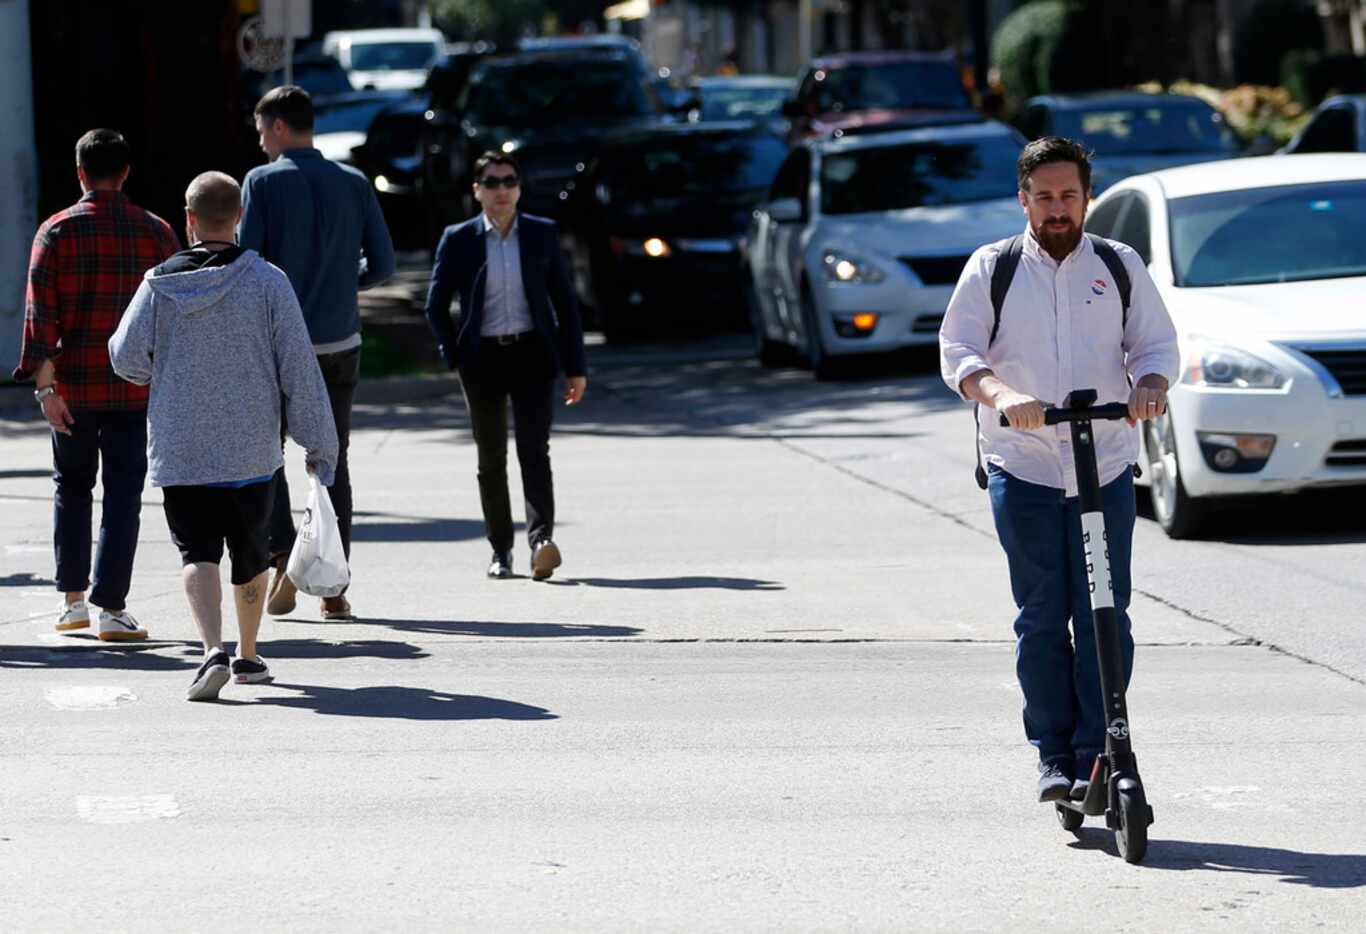 A man rides a Bird electric scooter in Uptown in Dallas, on Tuesday, October 23, 2018....